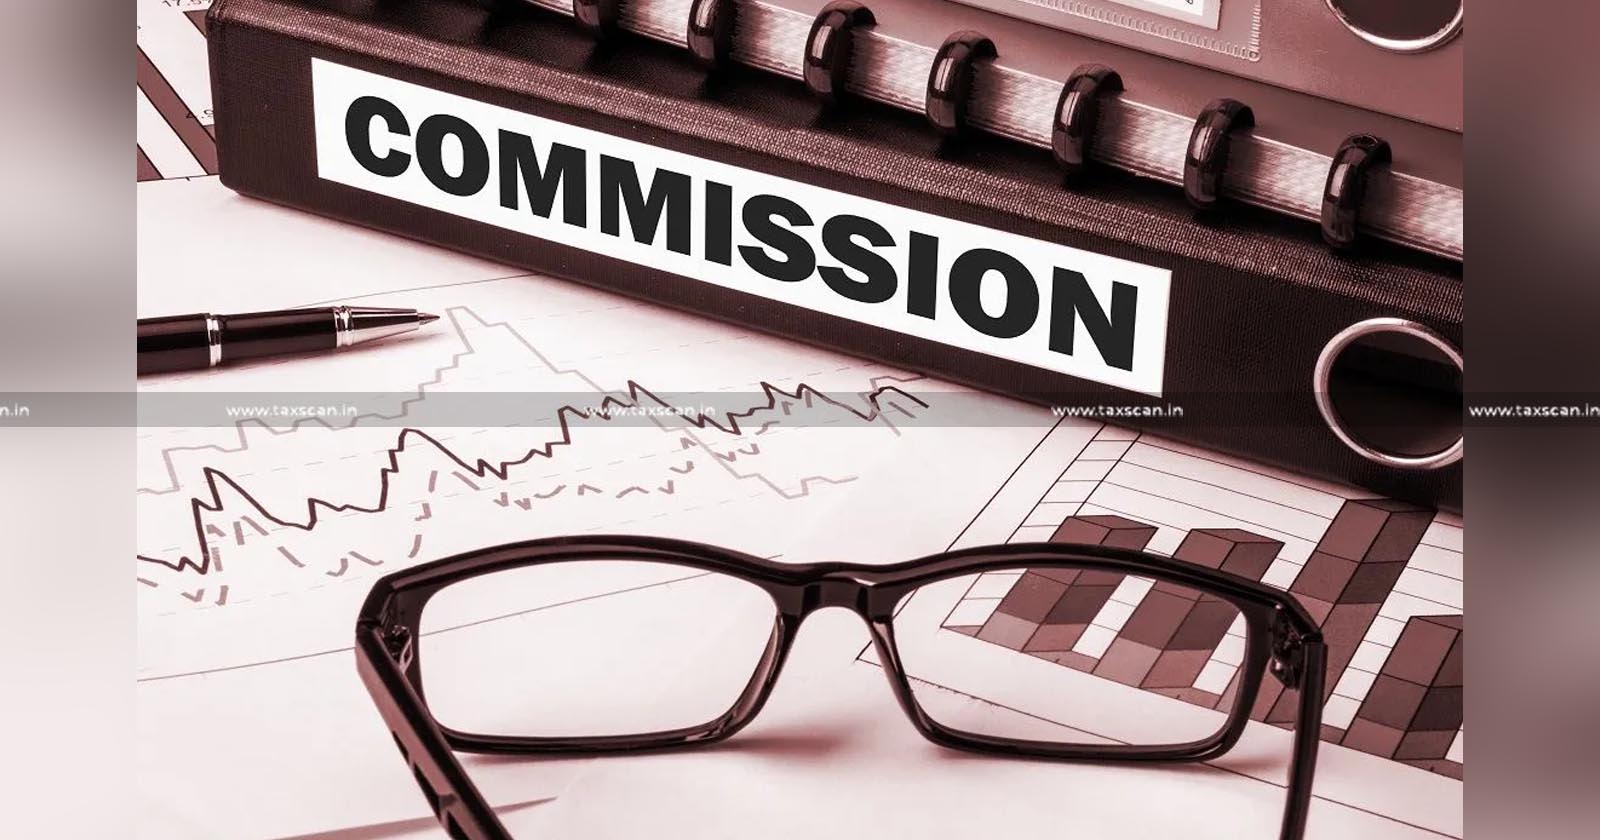 Commission Earned from Provision of Accommodation Entry - Commission Earned - Commission - Provision of Accommodation Entry shall be Added to Total Income of Assessee - Income - Assessee - ITAT - Taxscan